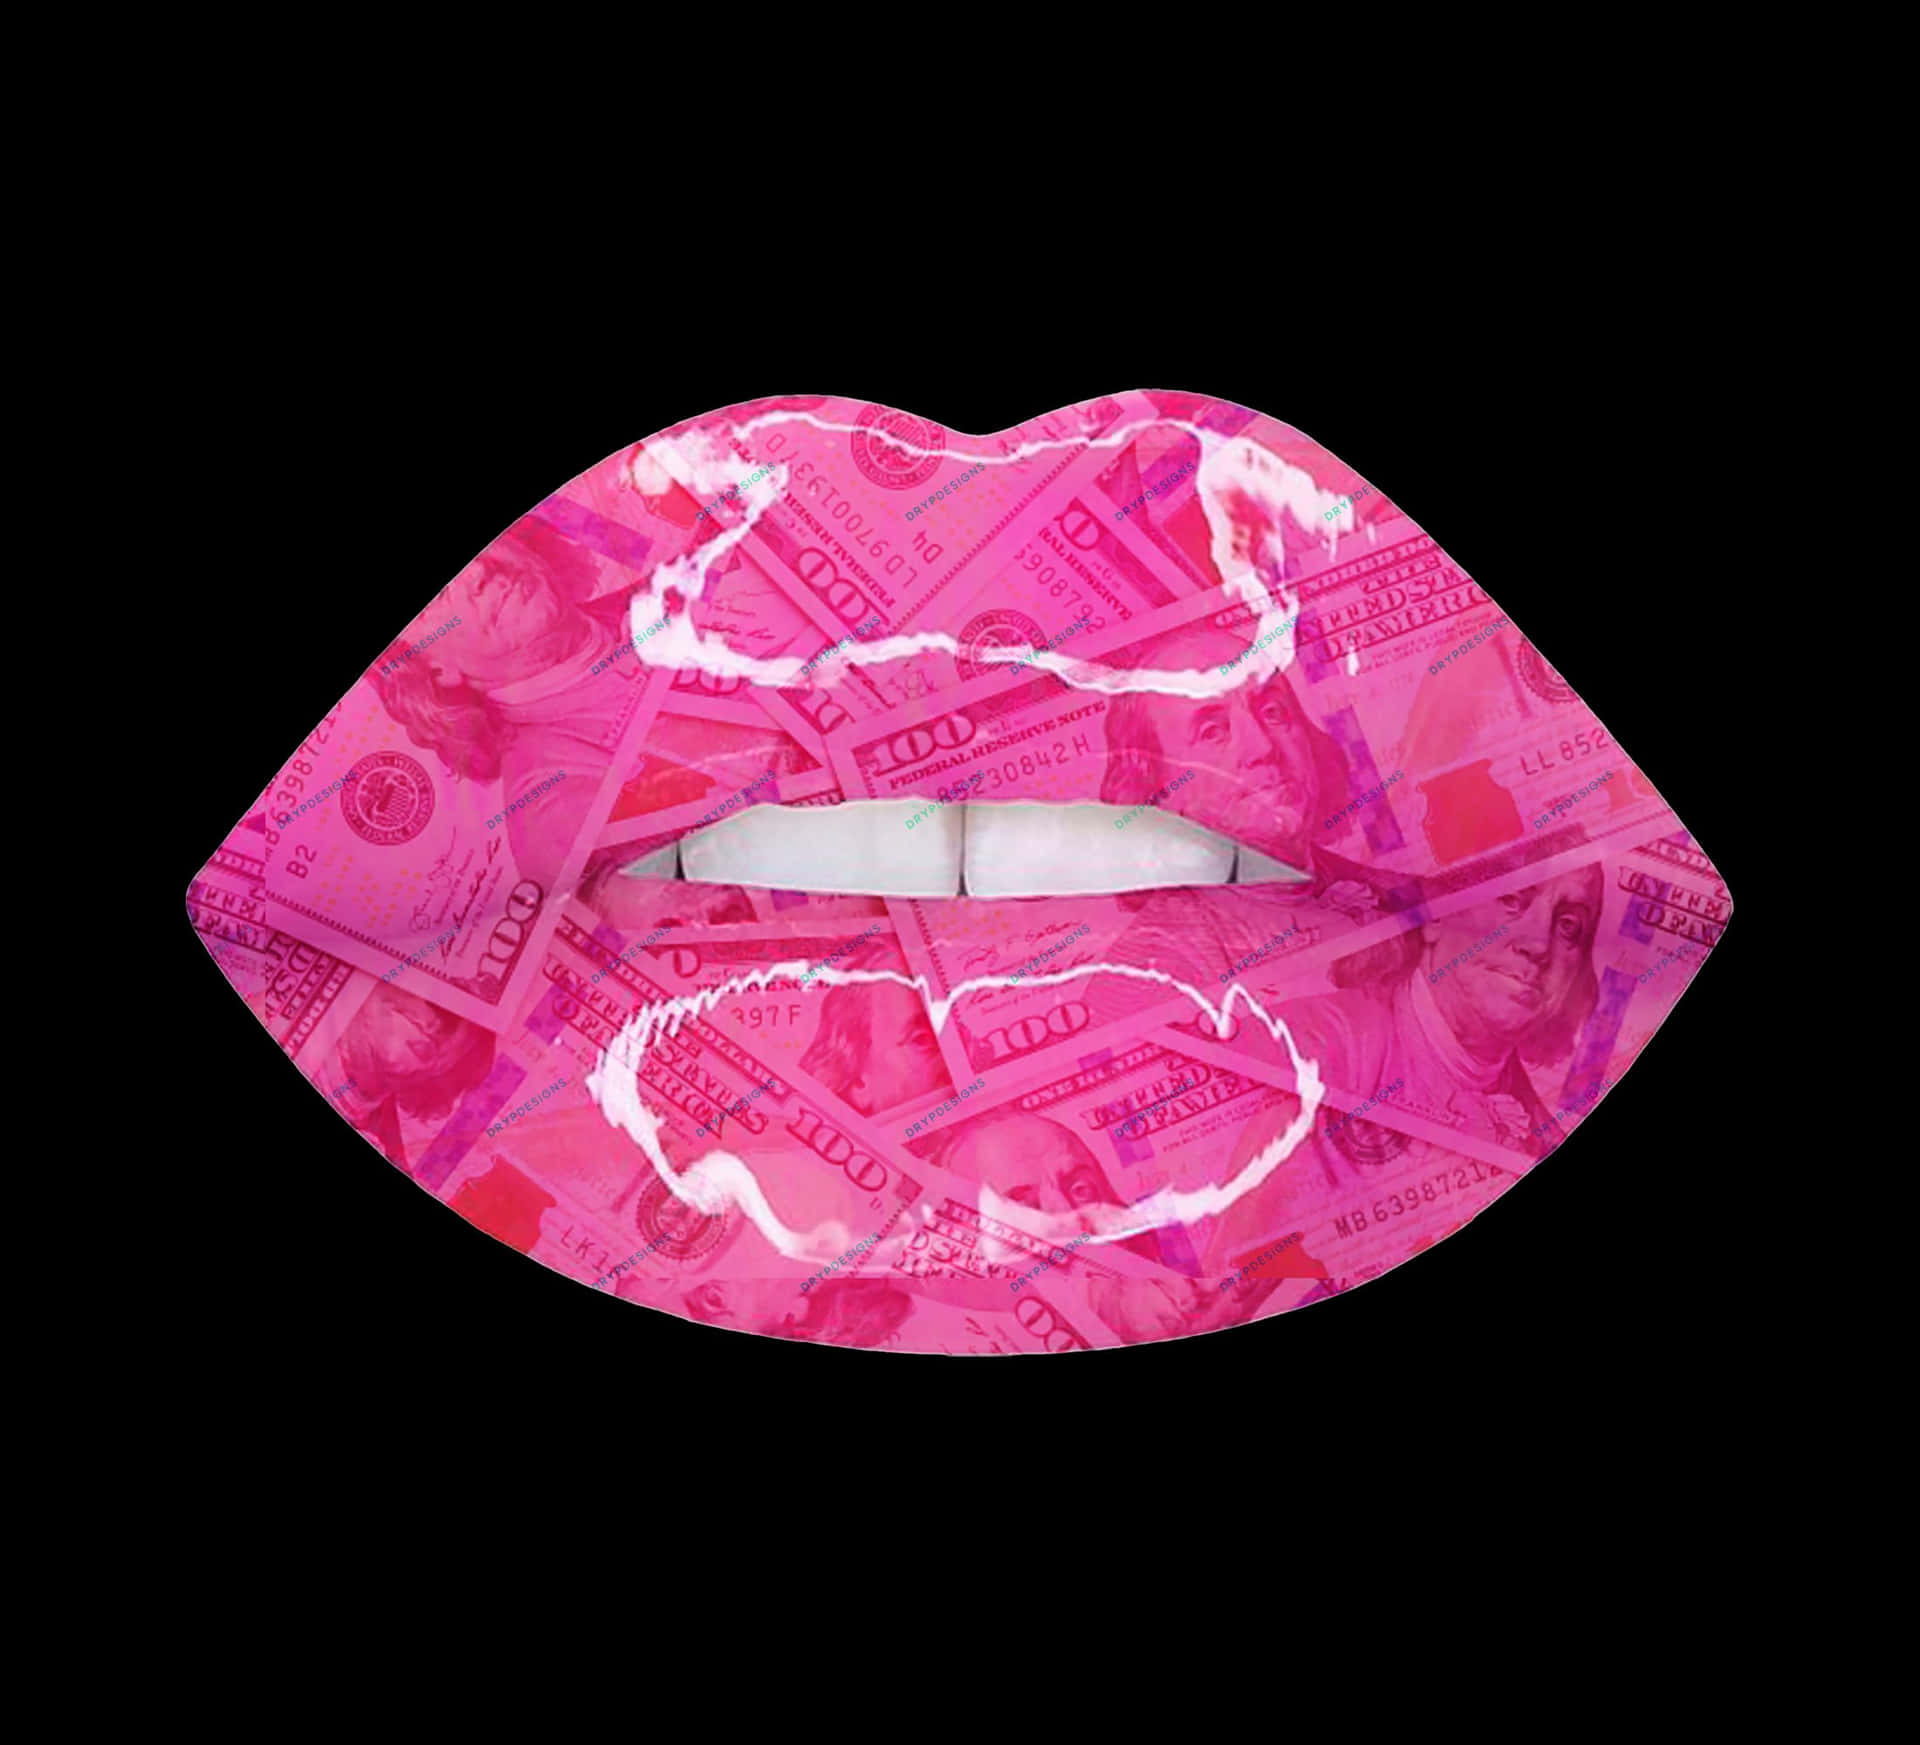 A Pink Lipstick With Money On It